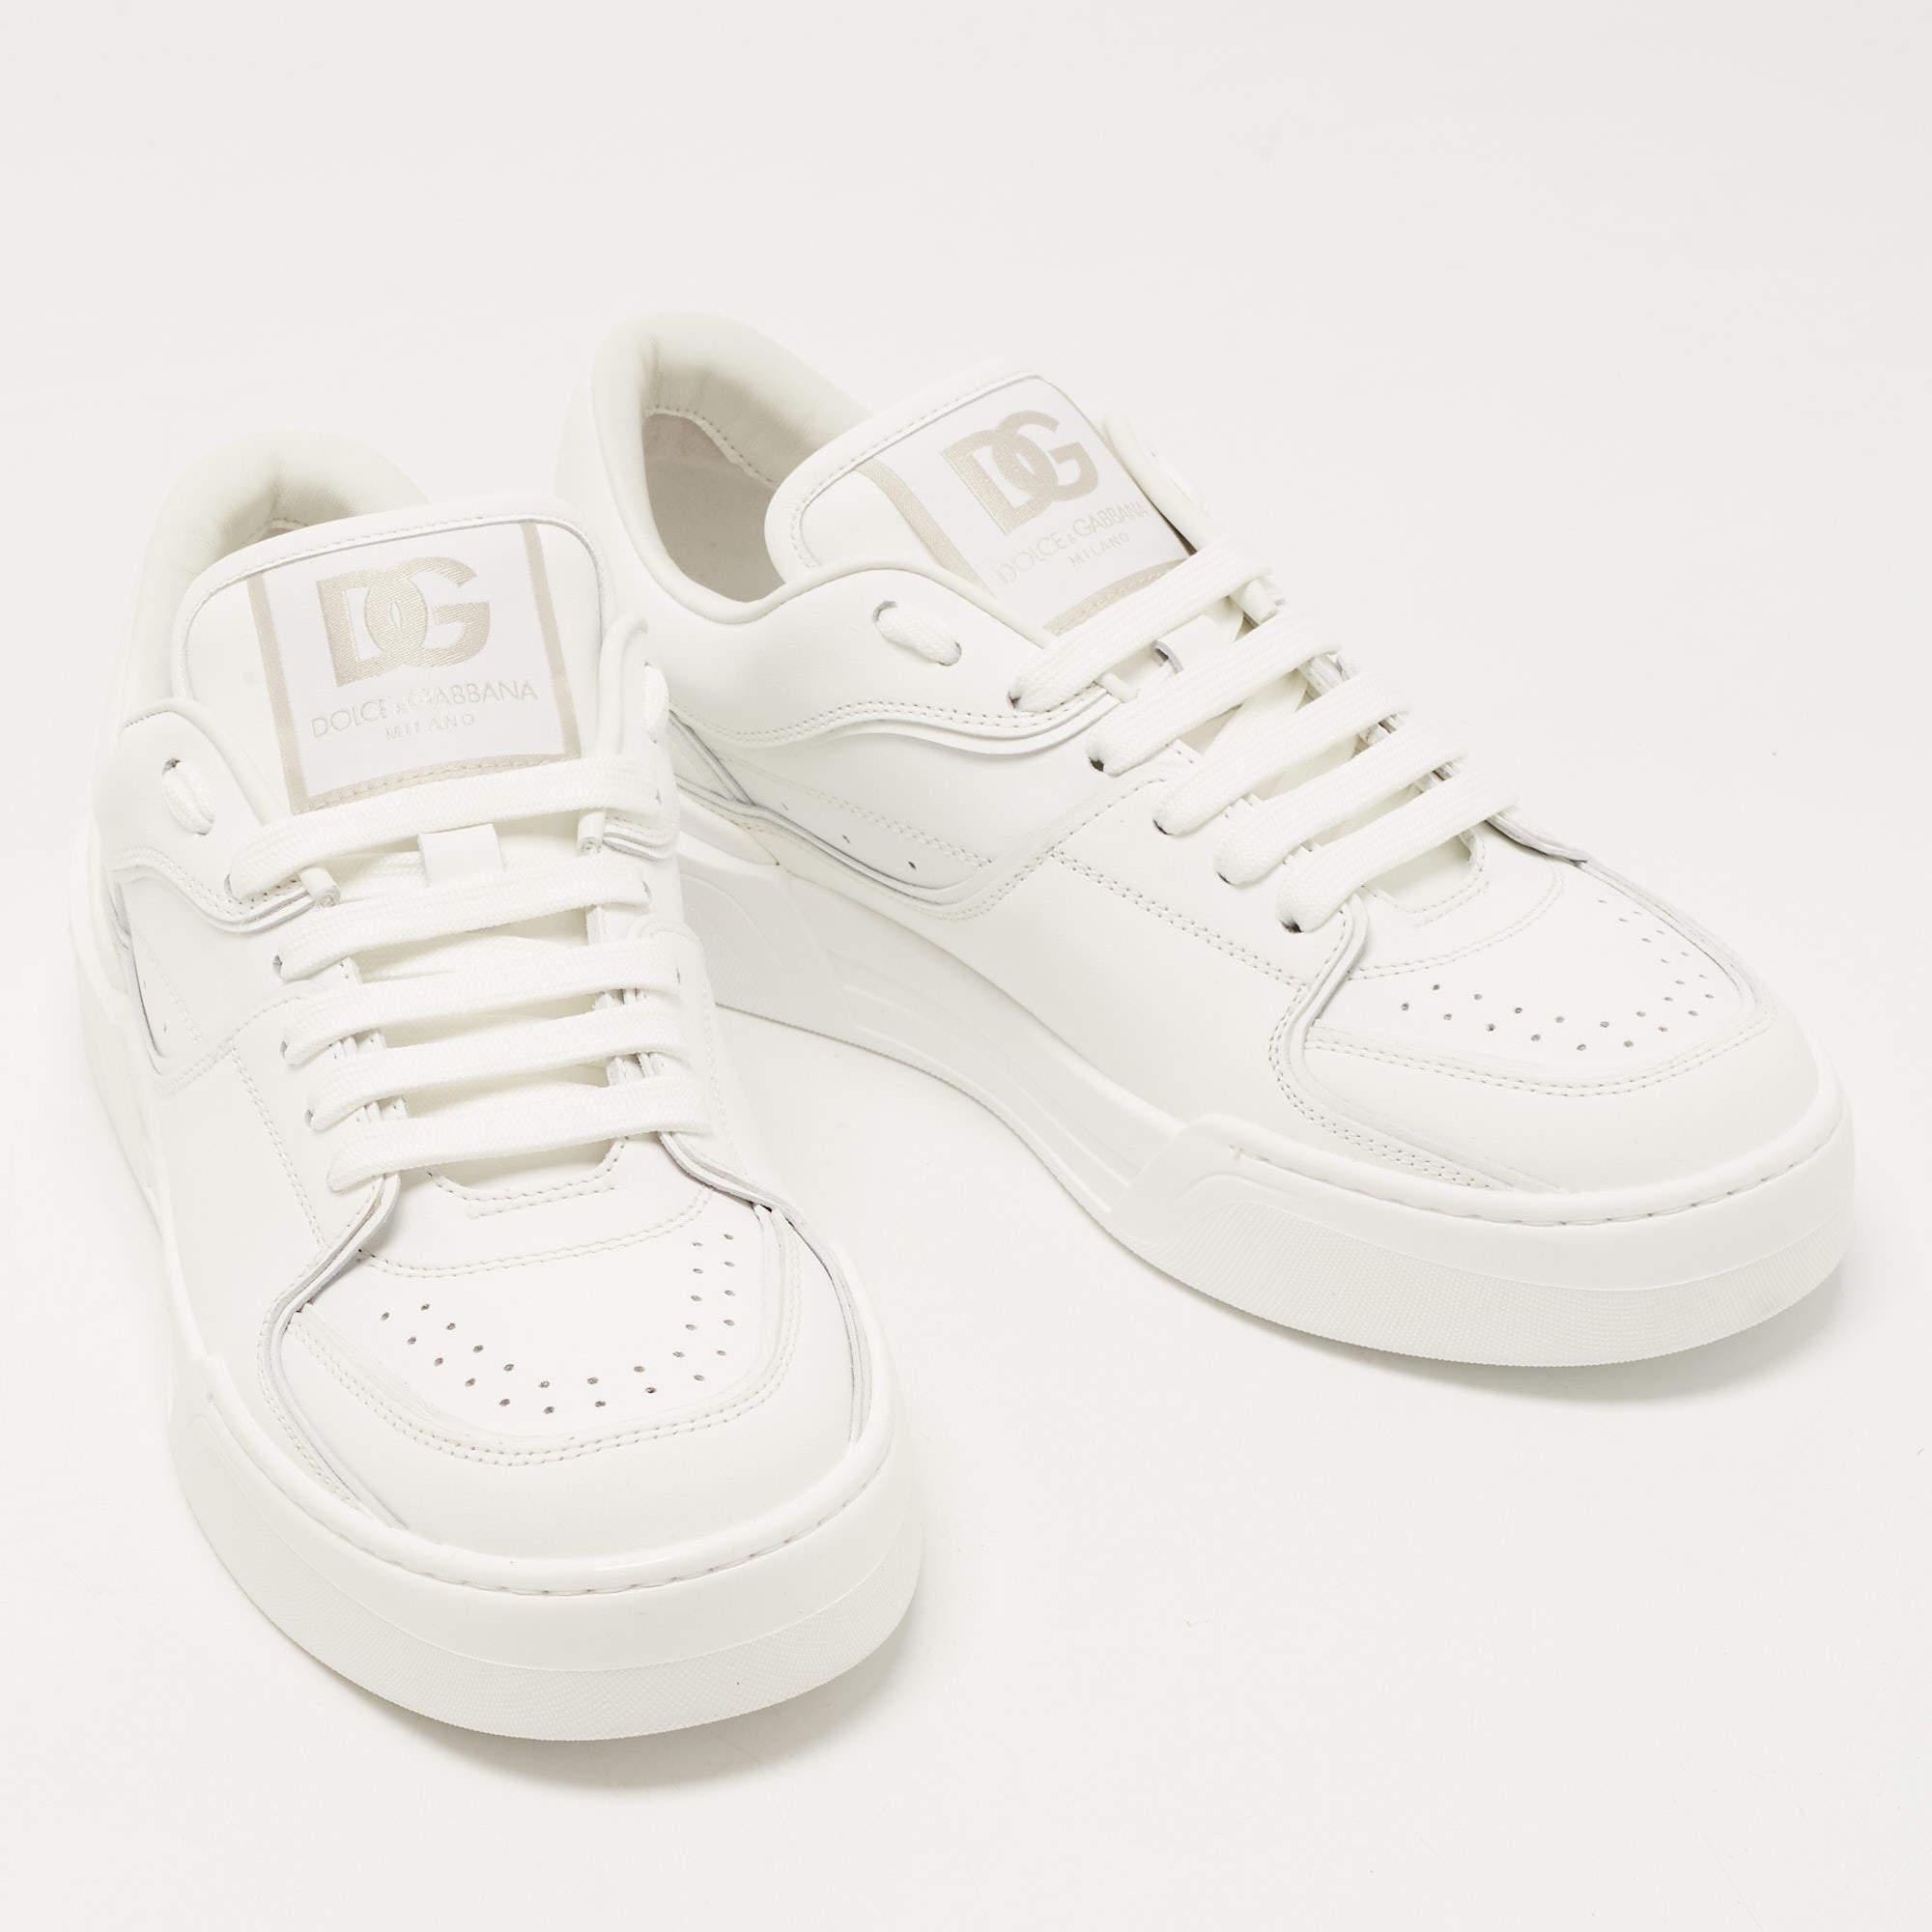 Dolce & Gabbana White Leather Roma Sneakers Size 41 3